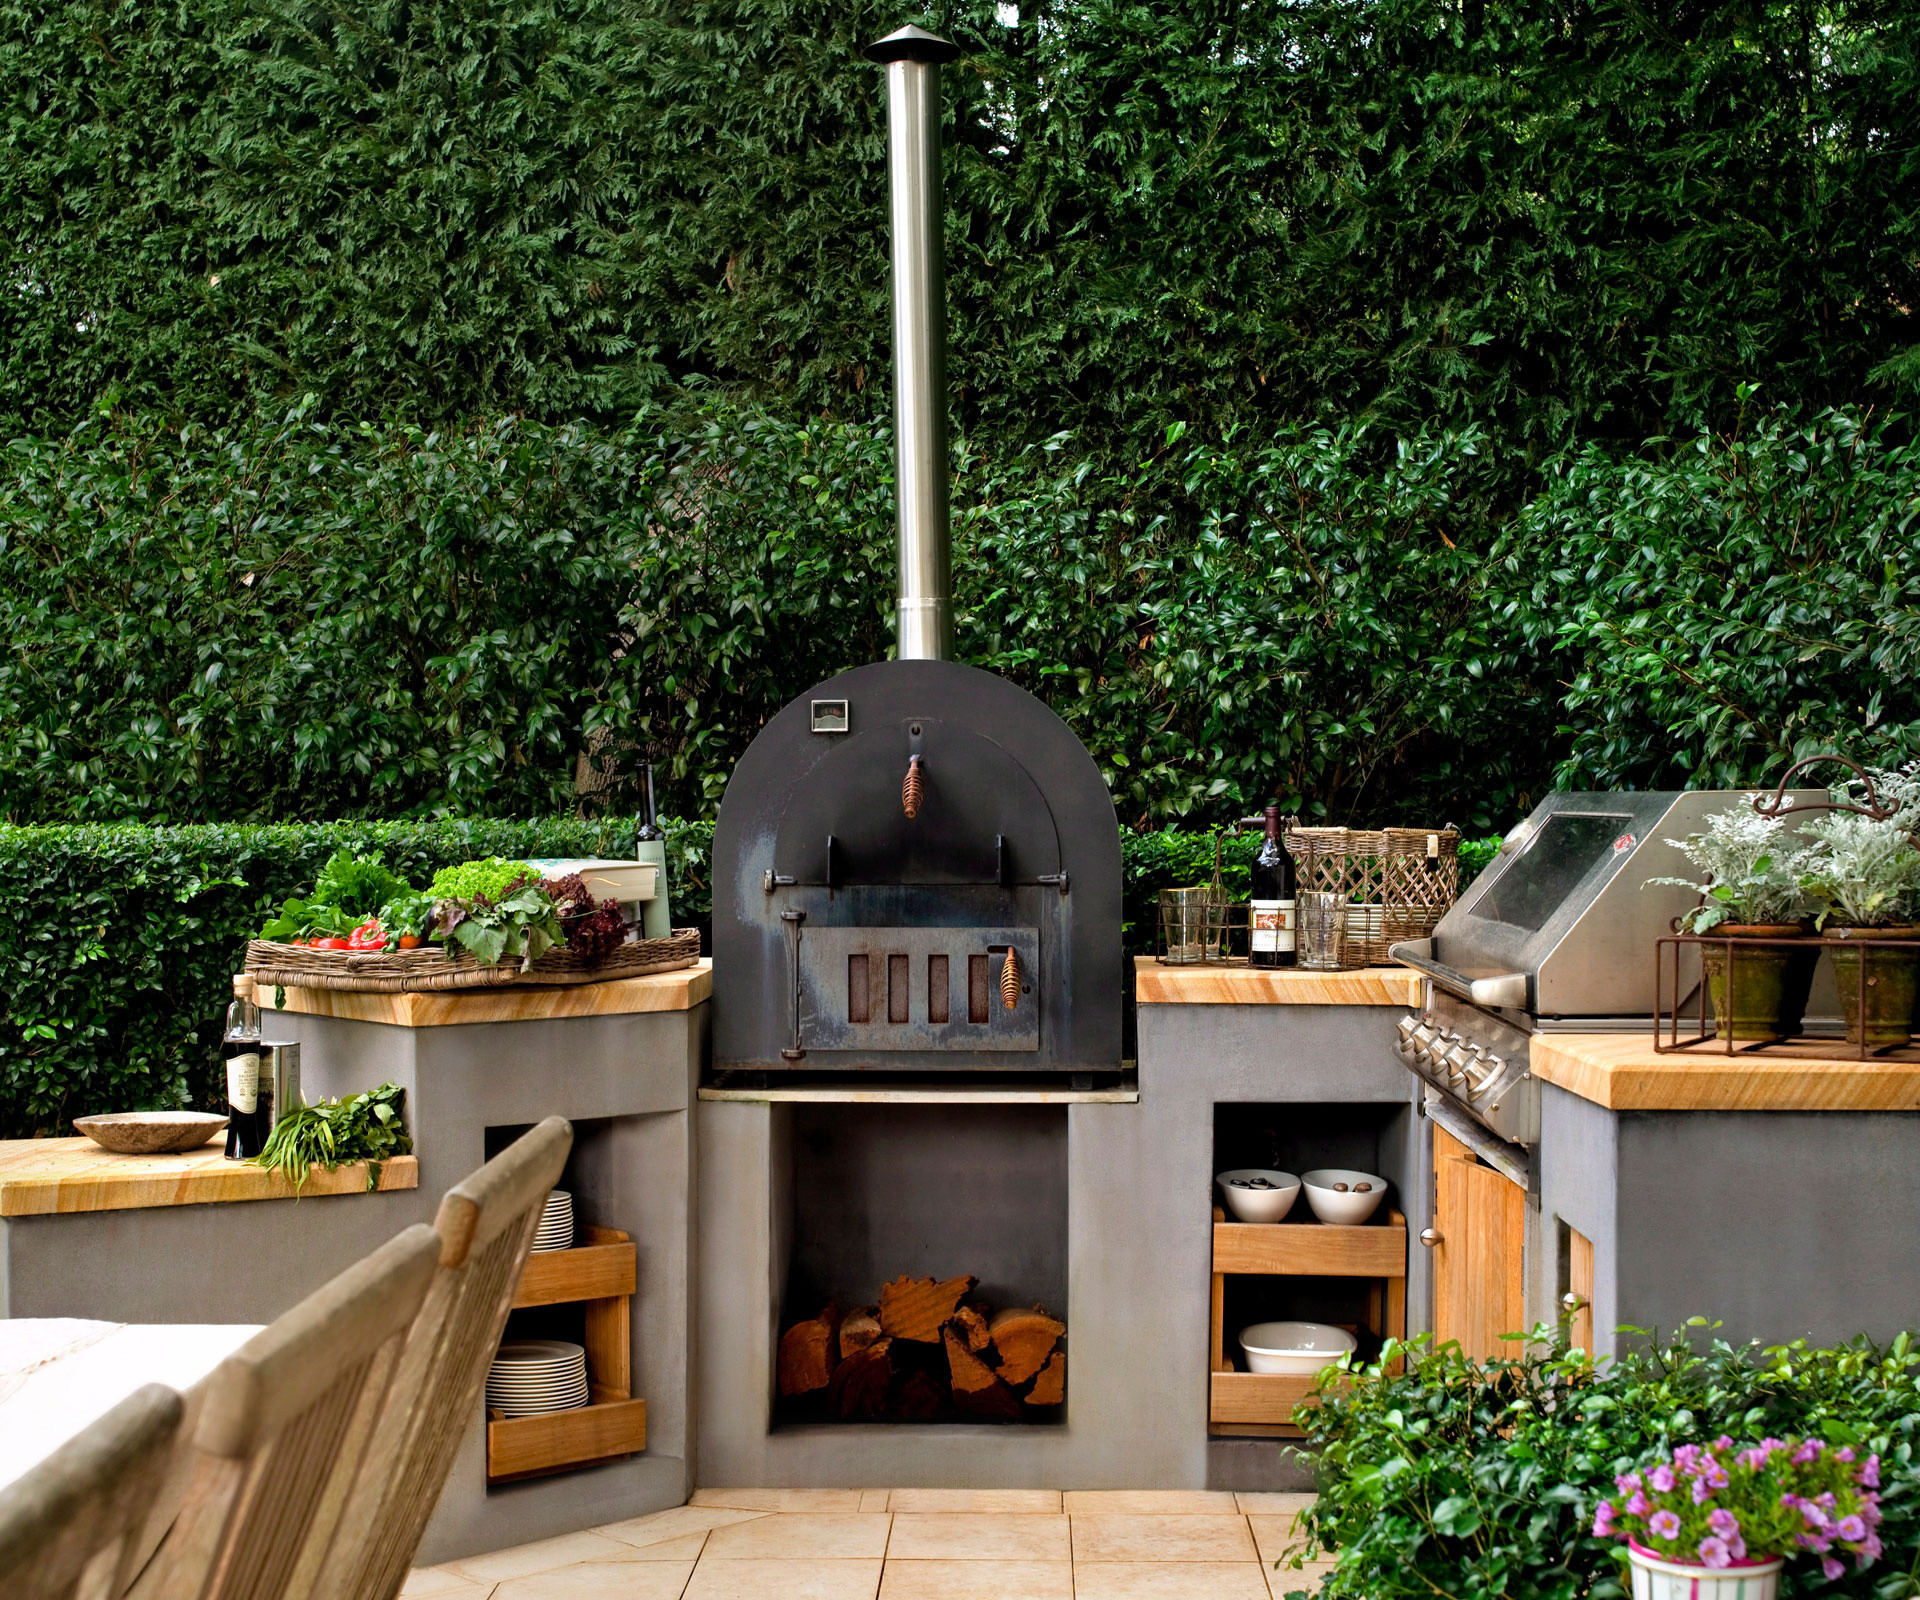 Build Your Own Outdoor Kitchen
 How to create your own outdoor kitchen